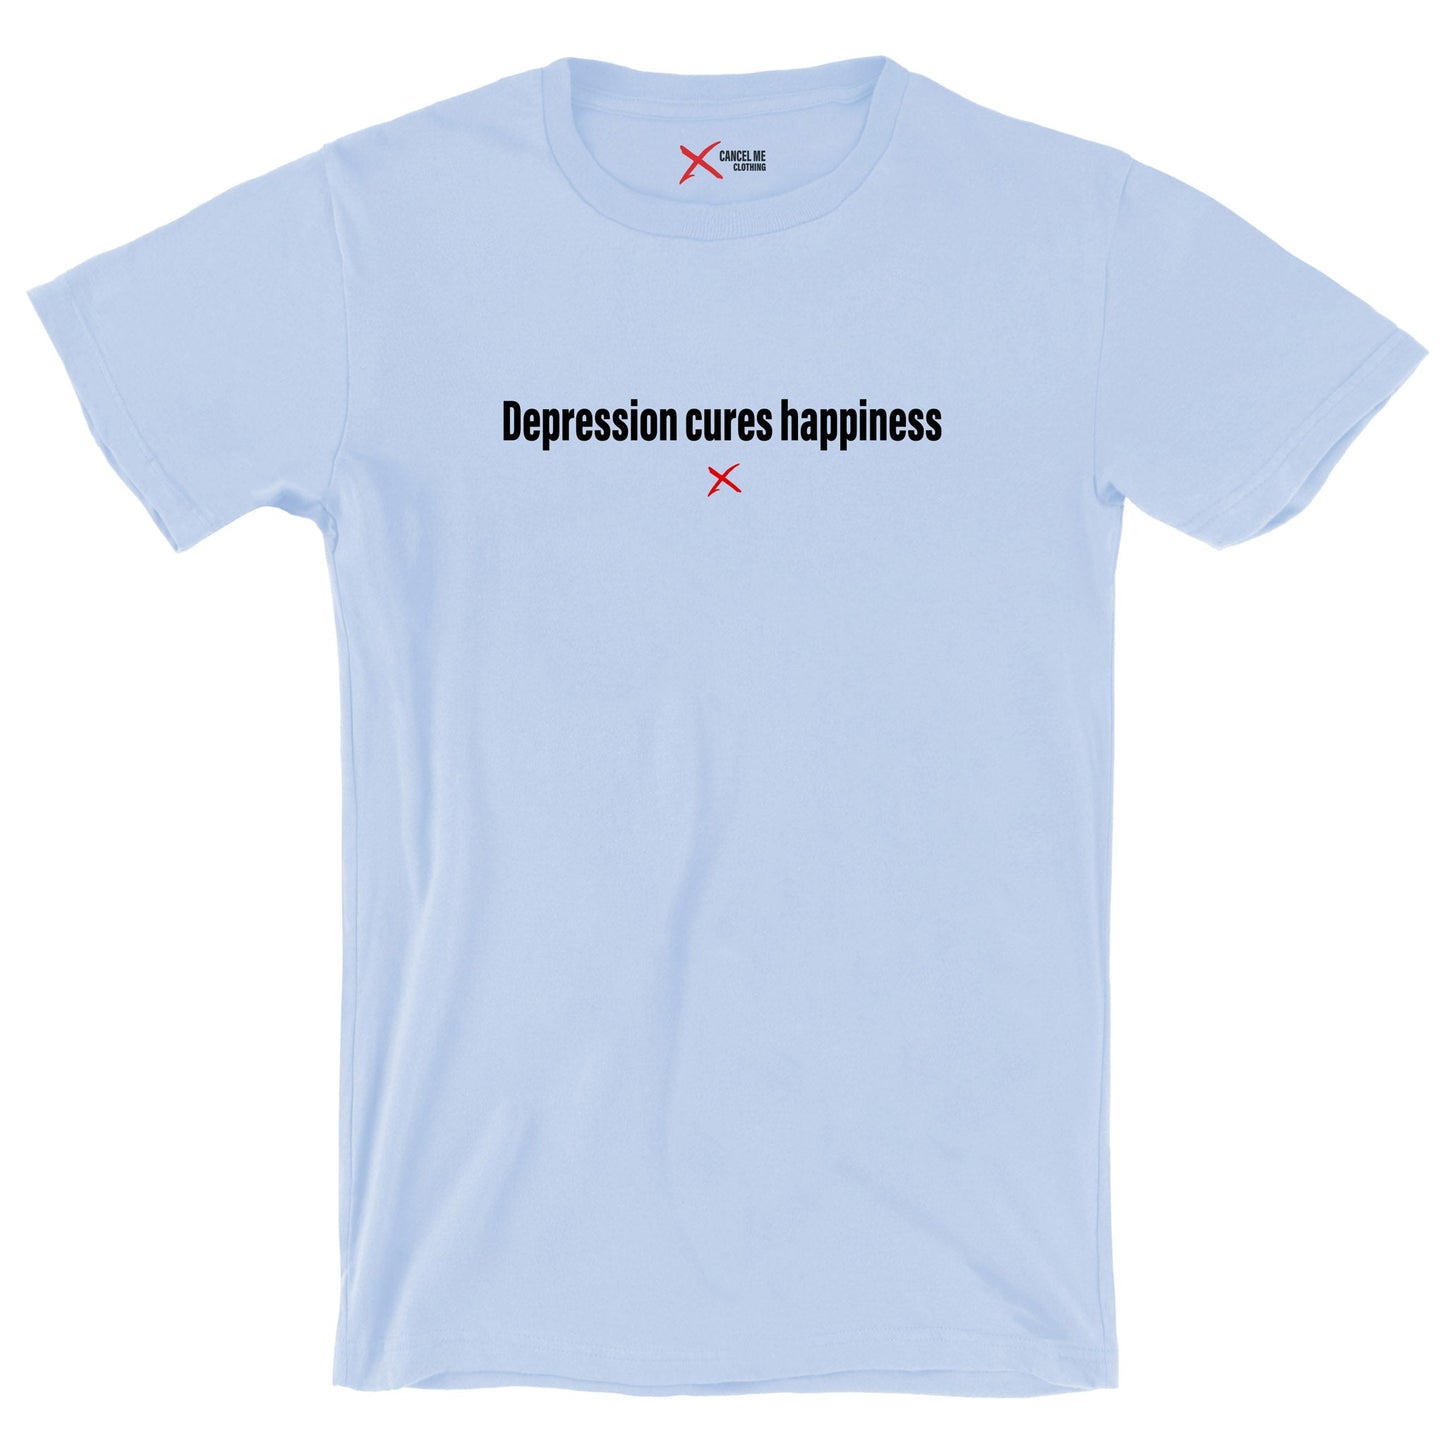 Depression cures happiness - Shirt